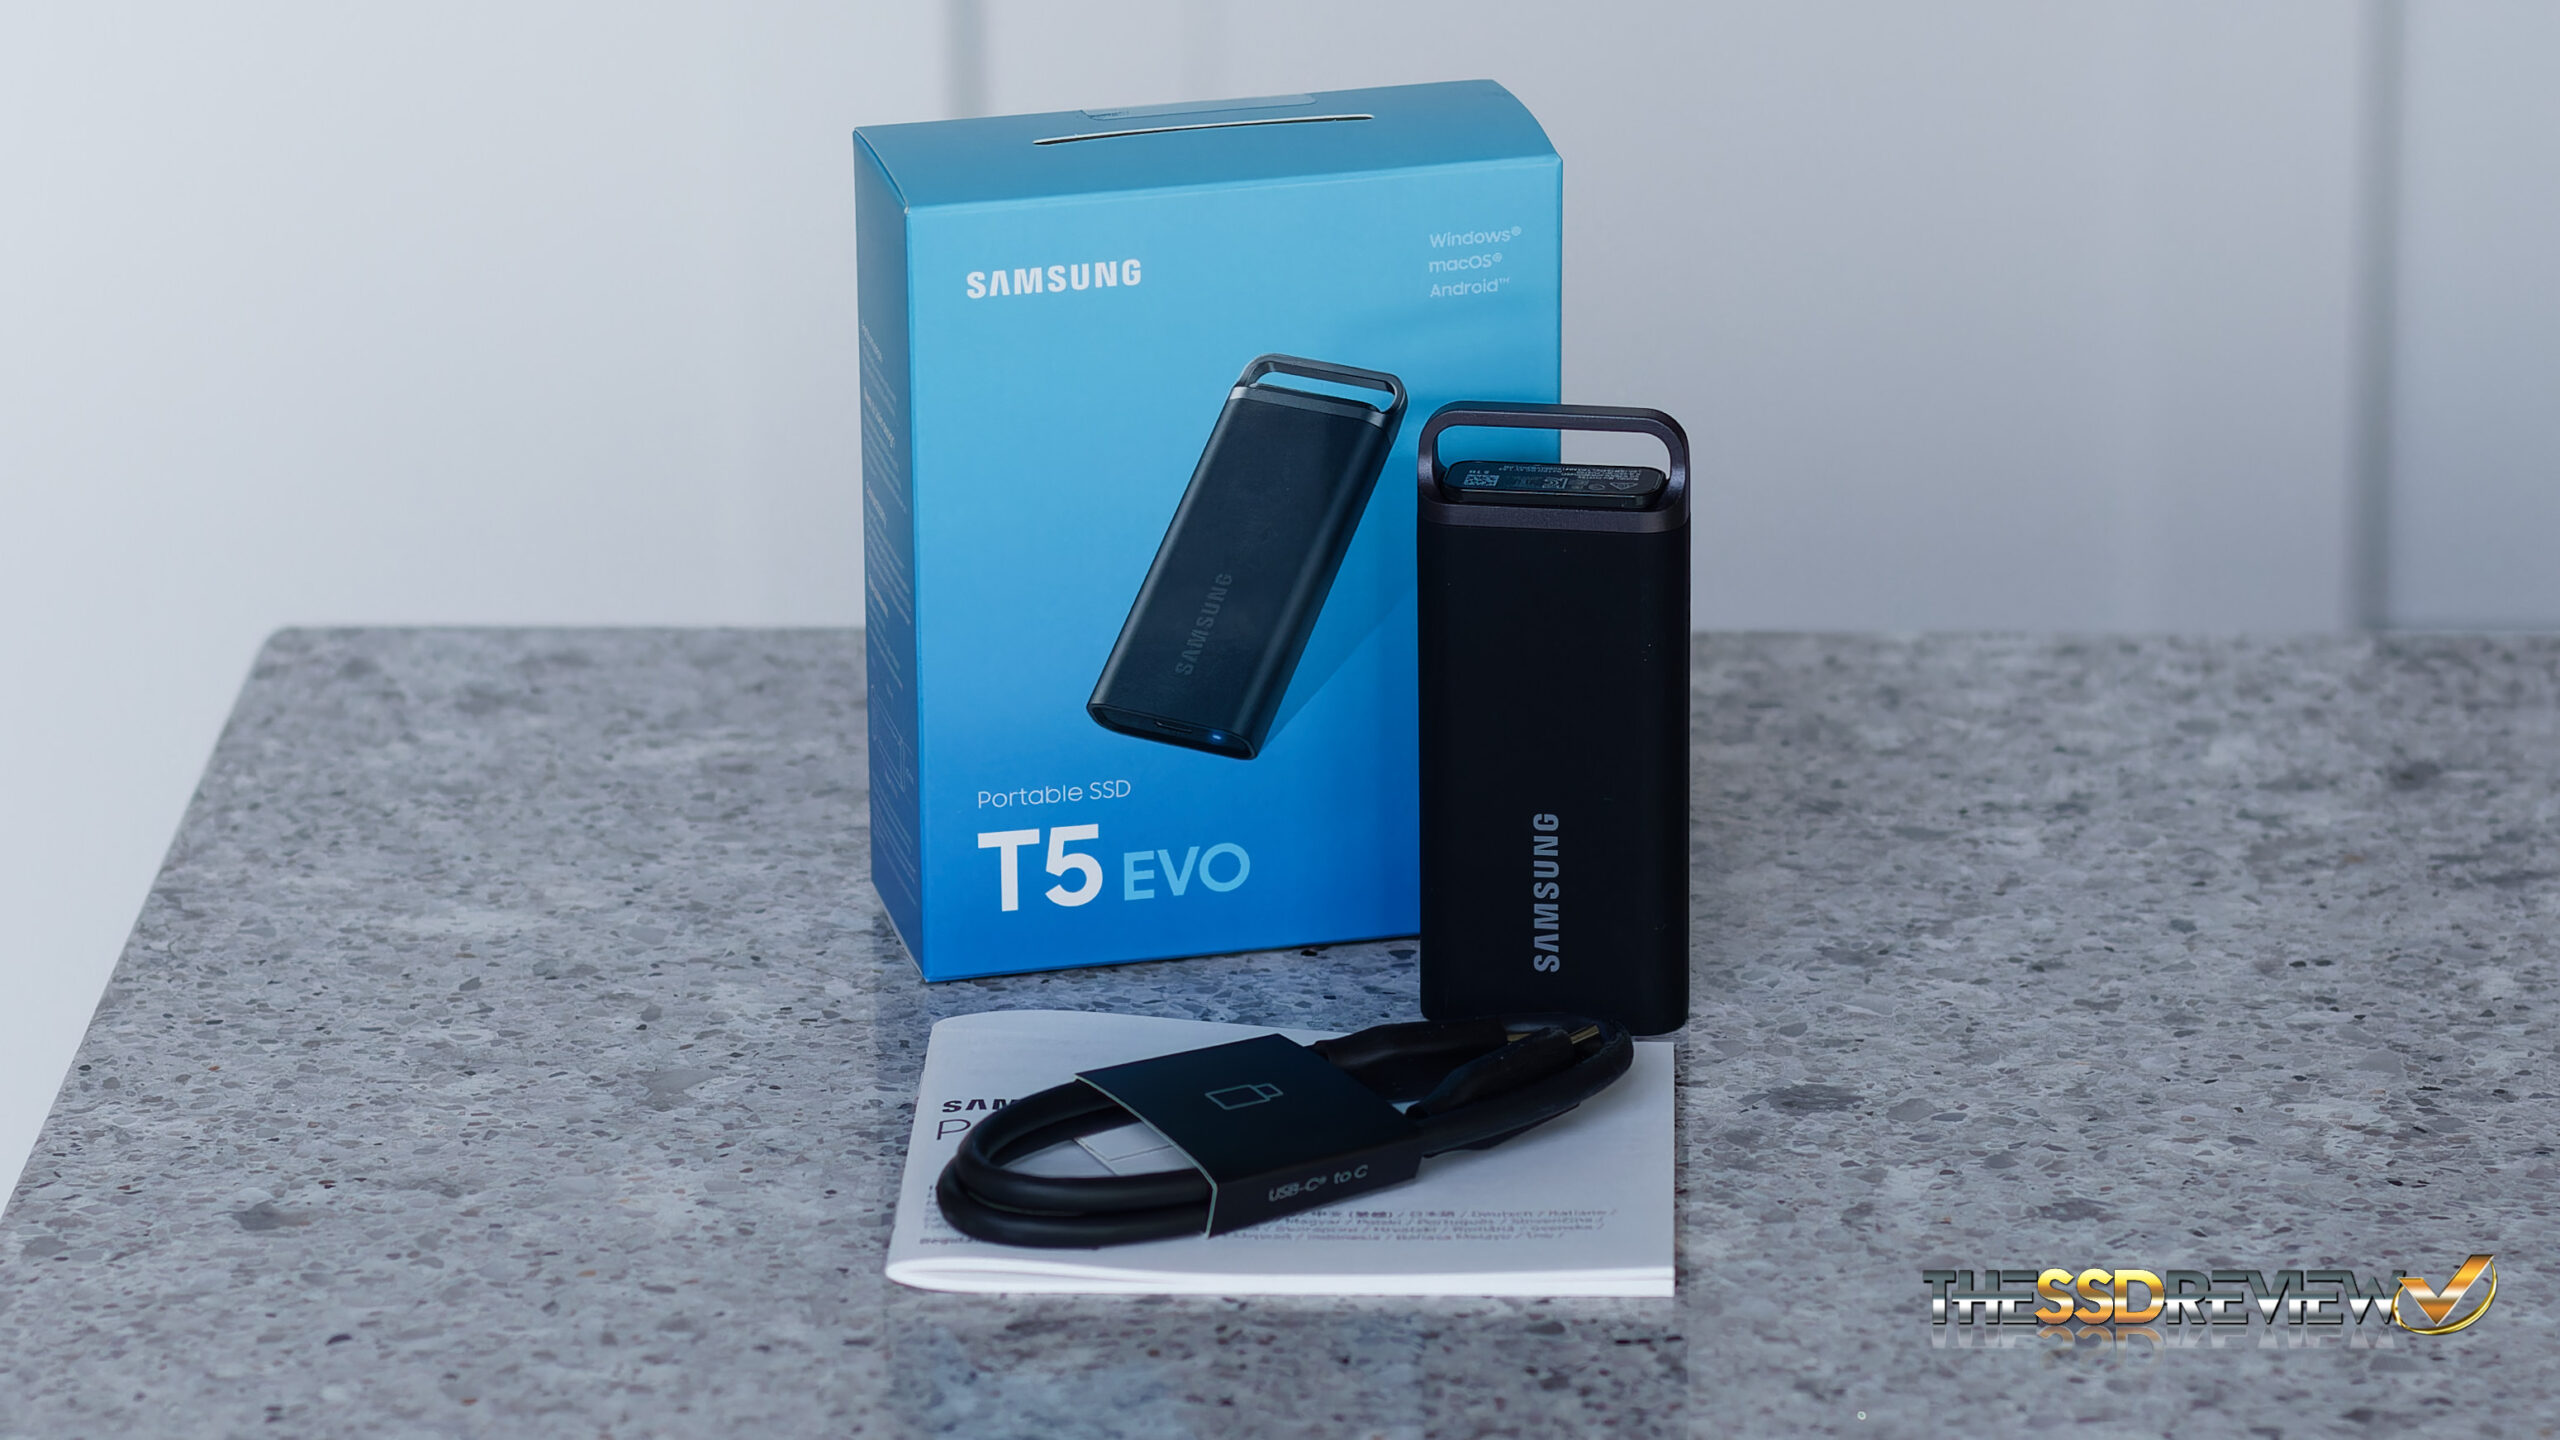 Samsung T9 (2GB) review